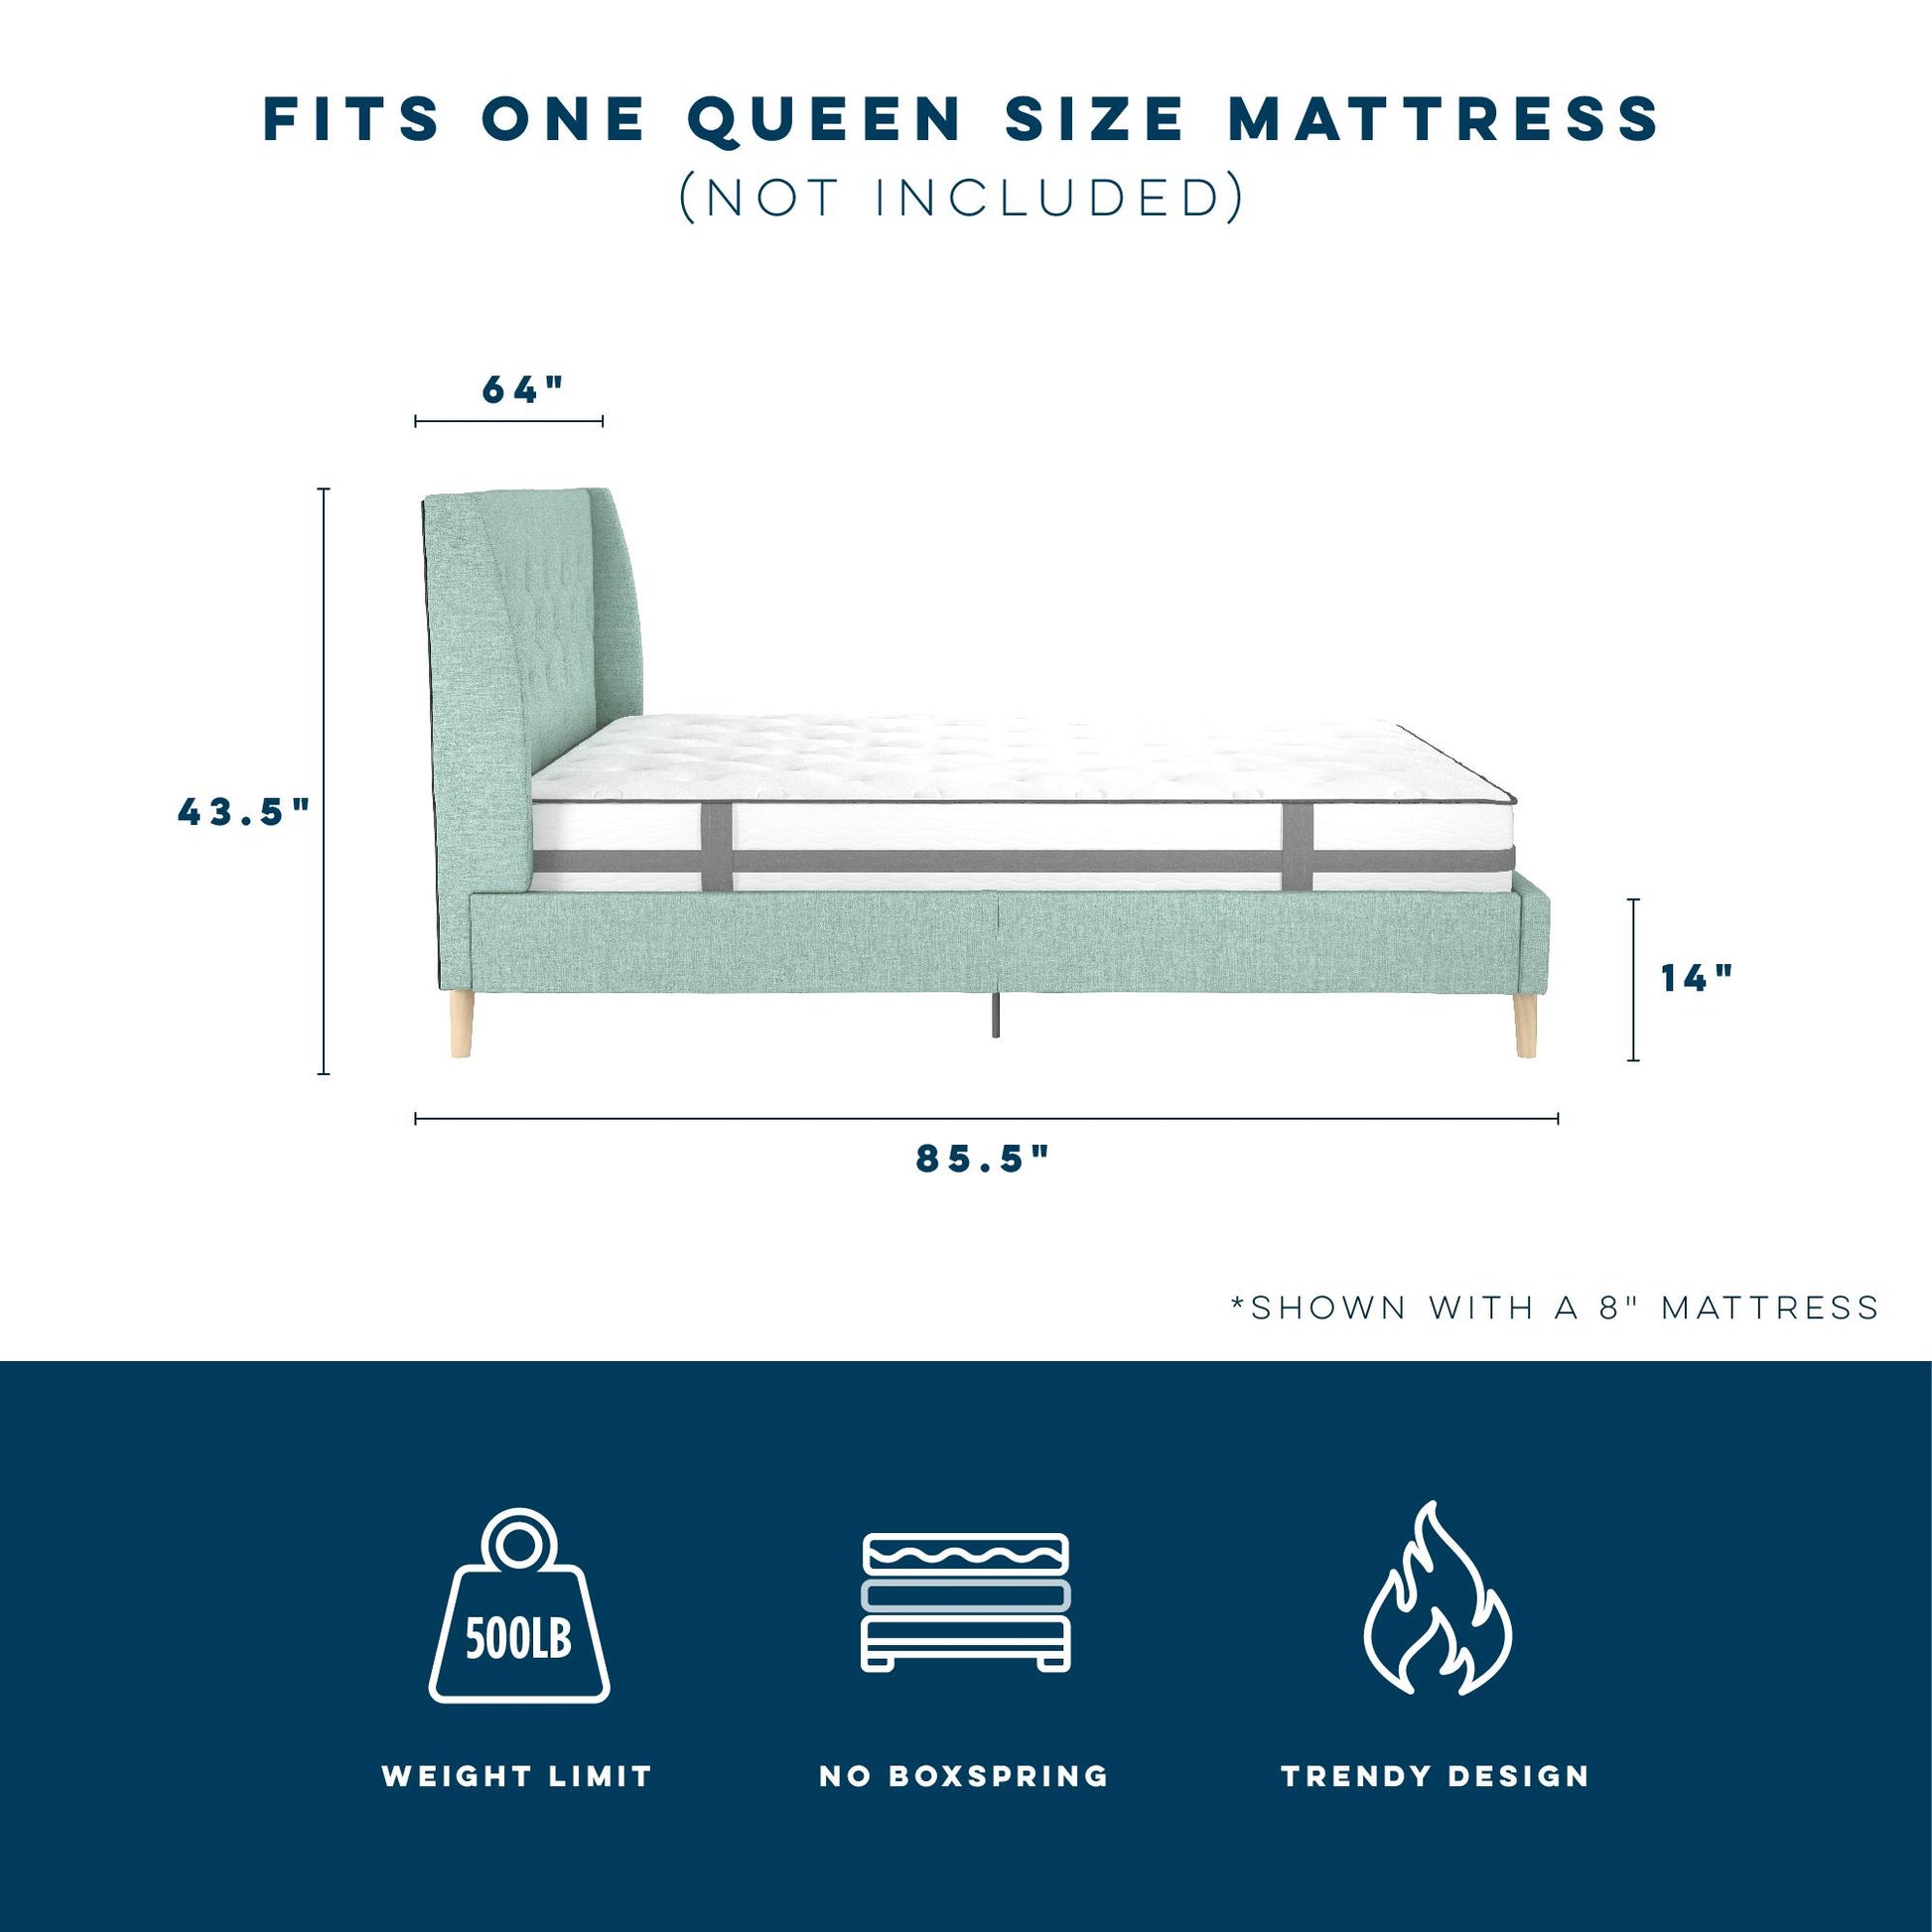 Her Majesty Bed - Green - Queen